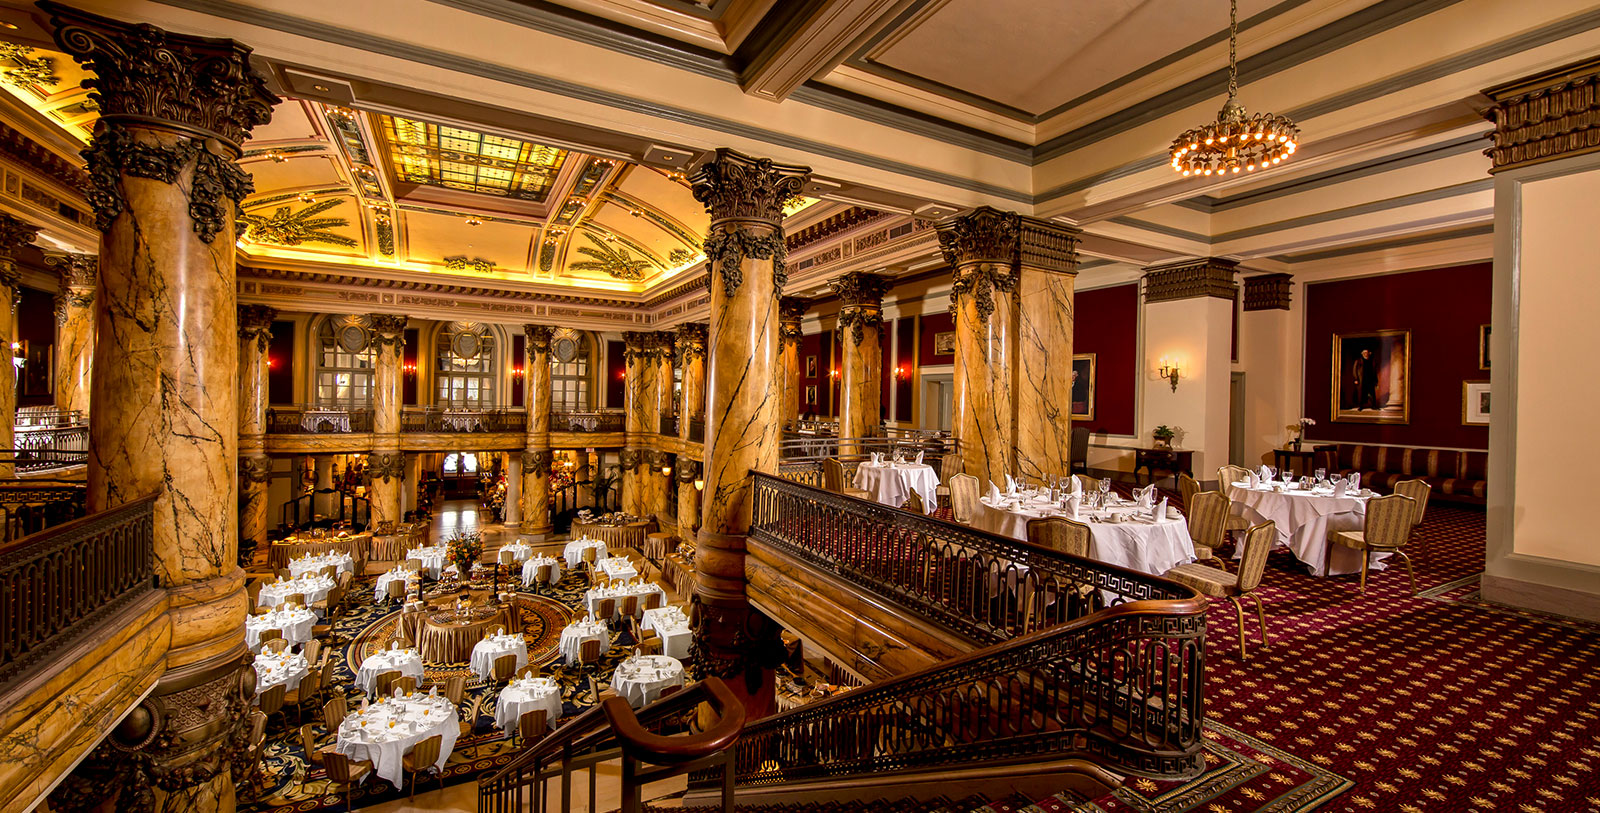 Image of Event Space The Jefferson Hotel, 1895, Member of Historic Hotels of America, in Richmond, Virginia, Weddings